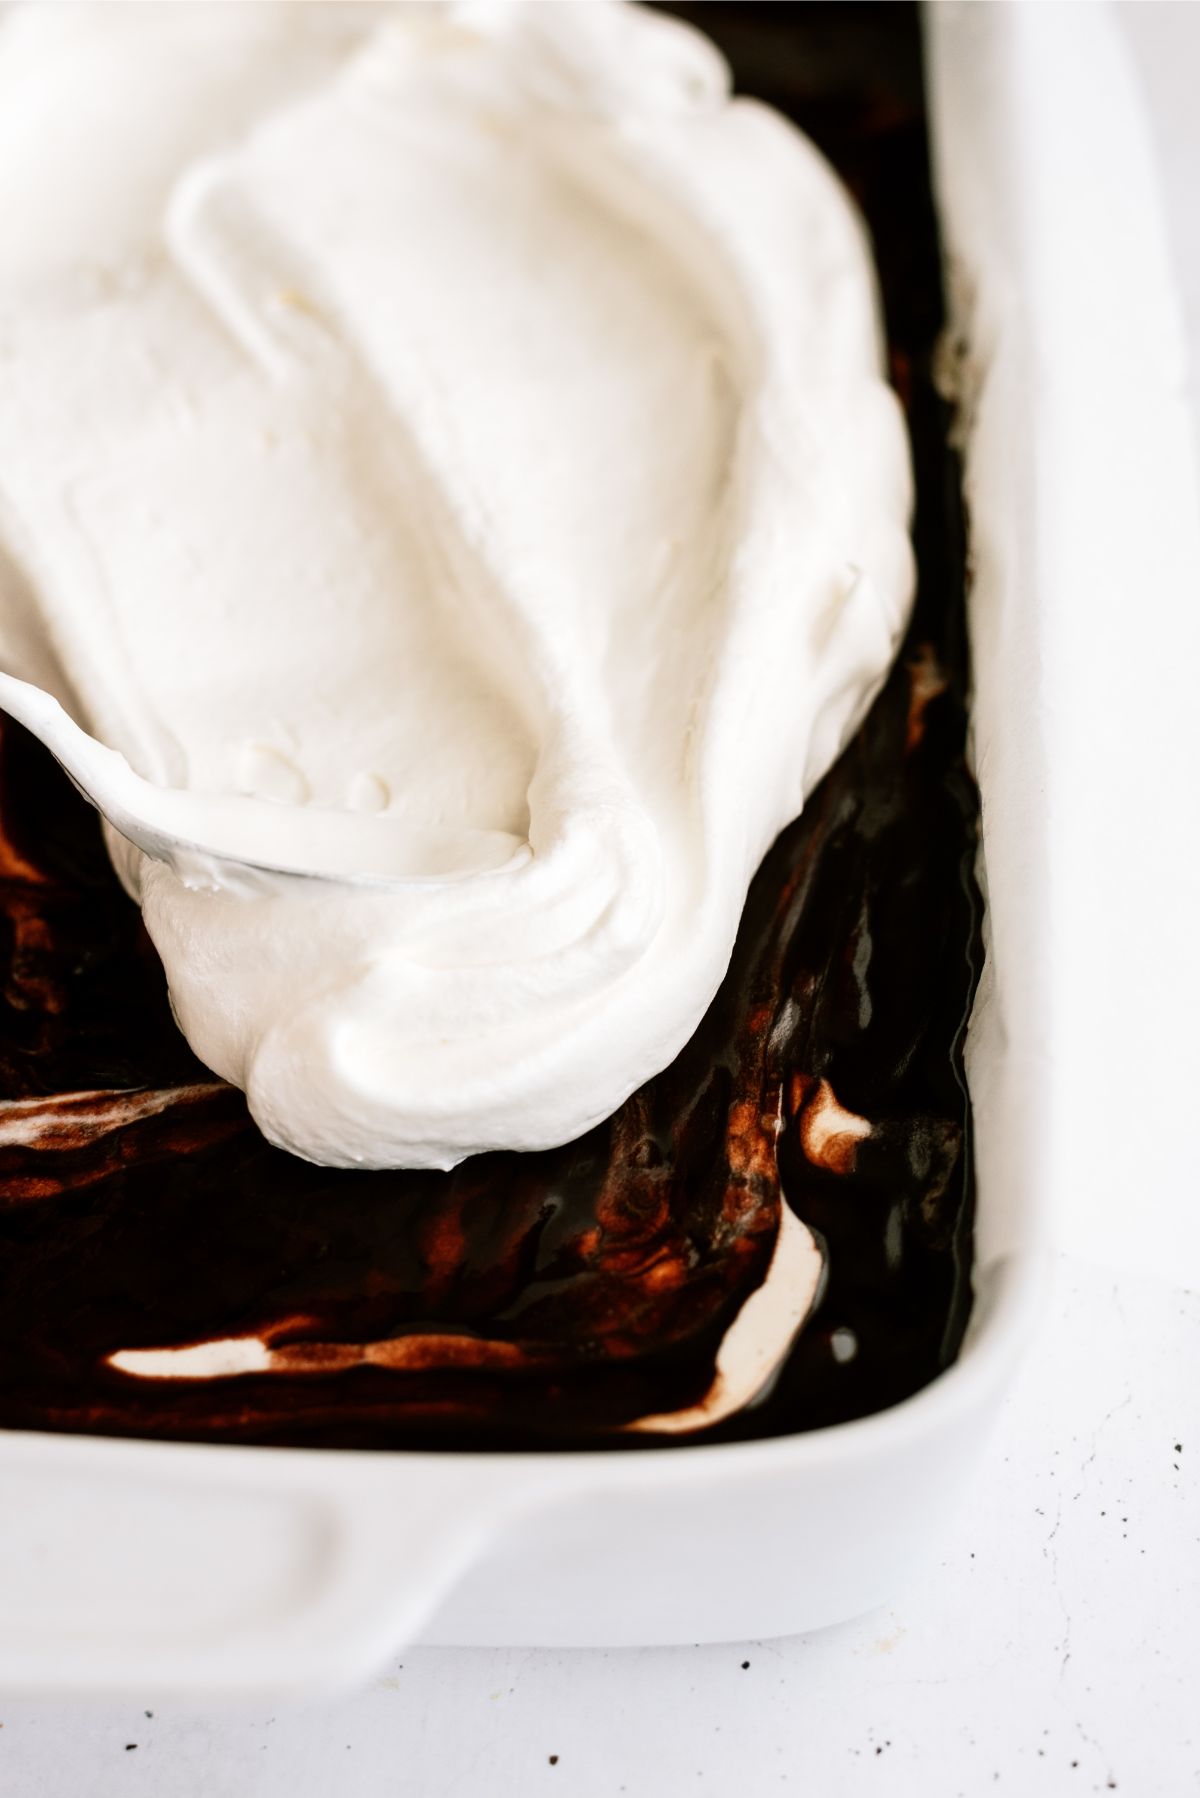 Add whip cream layer on top of hot fudge